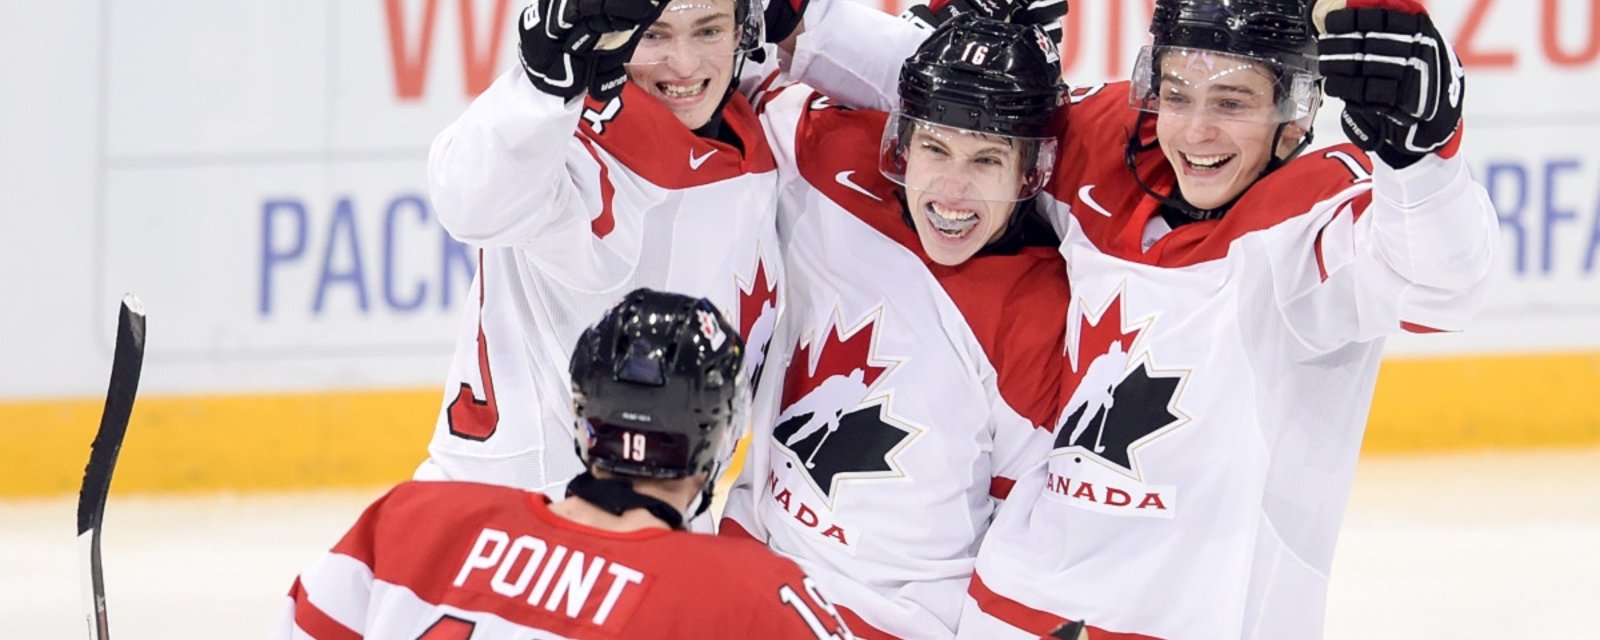 Breaking: Young Maple Leaf officially joining Team Canada roster.